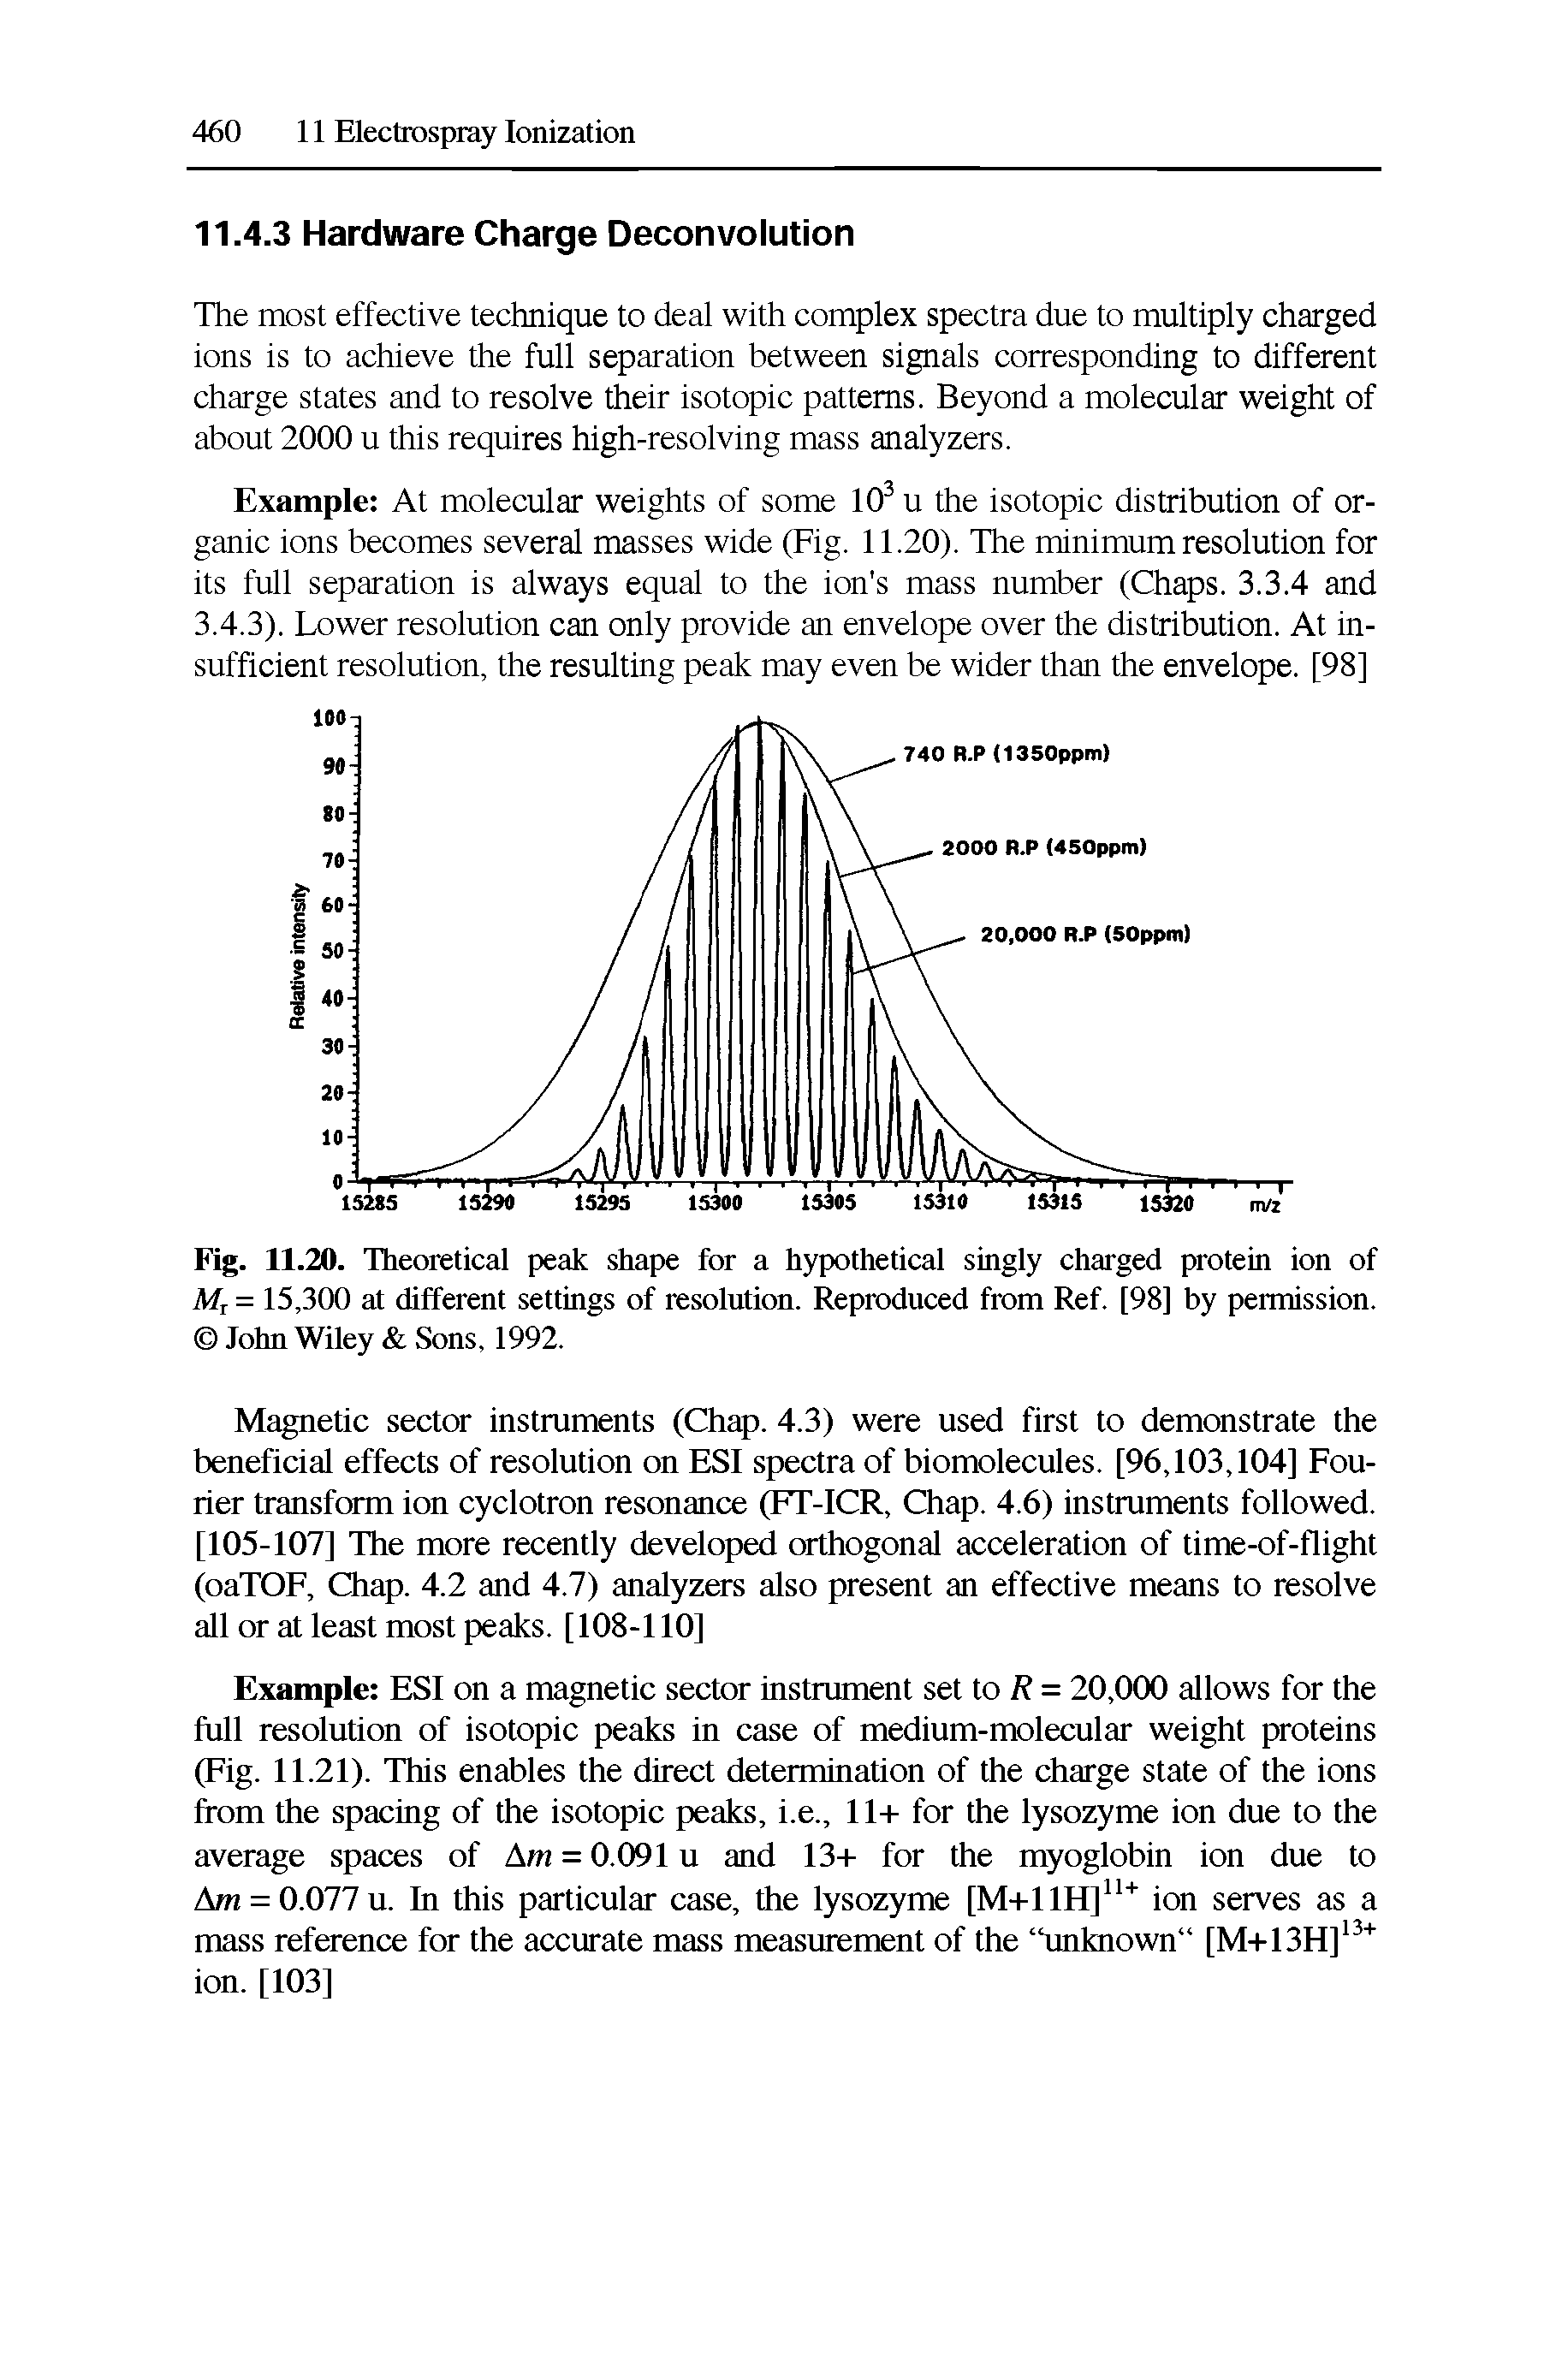 Fig. 11.20. Theoretical peak shape for a hypothetical singly charged protein ion of Mr = 15,300 at different settings of resolution. Reproduced from Ref. [98] by permission. John Wiley Sons, 1992.